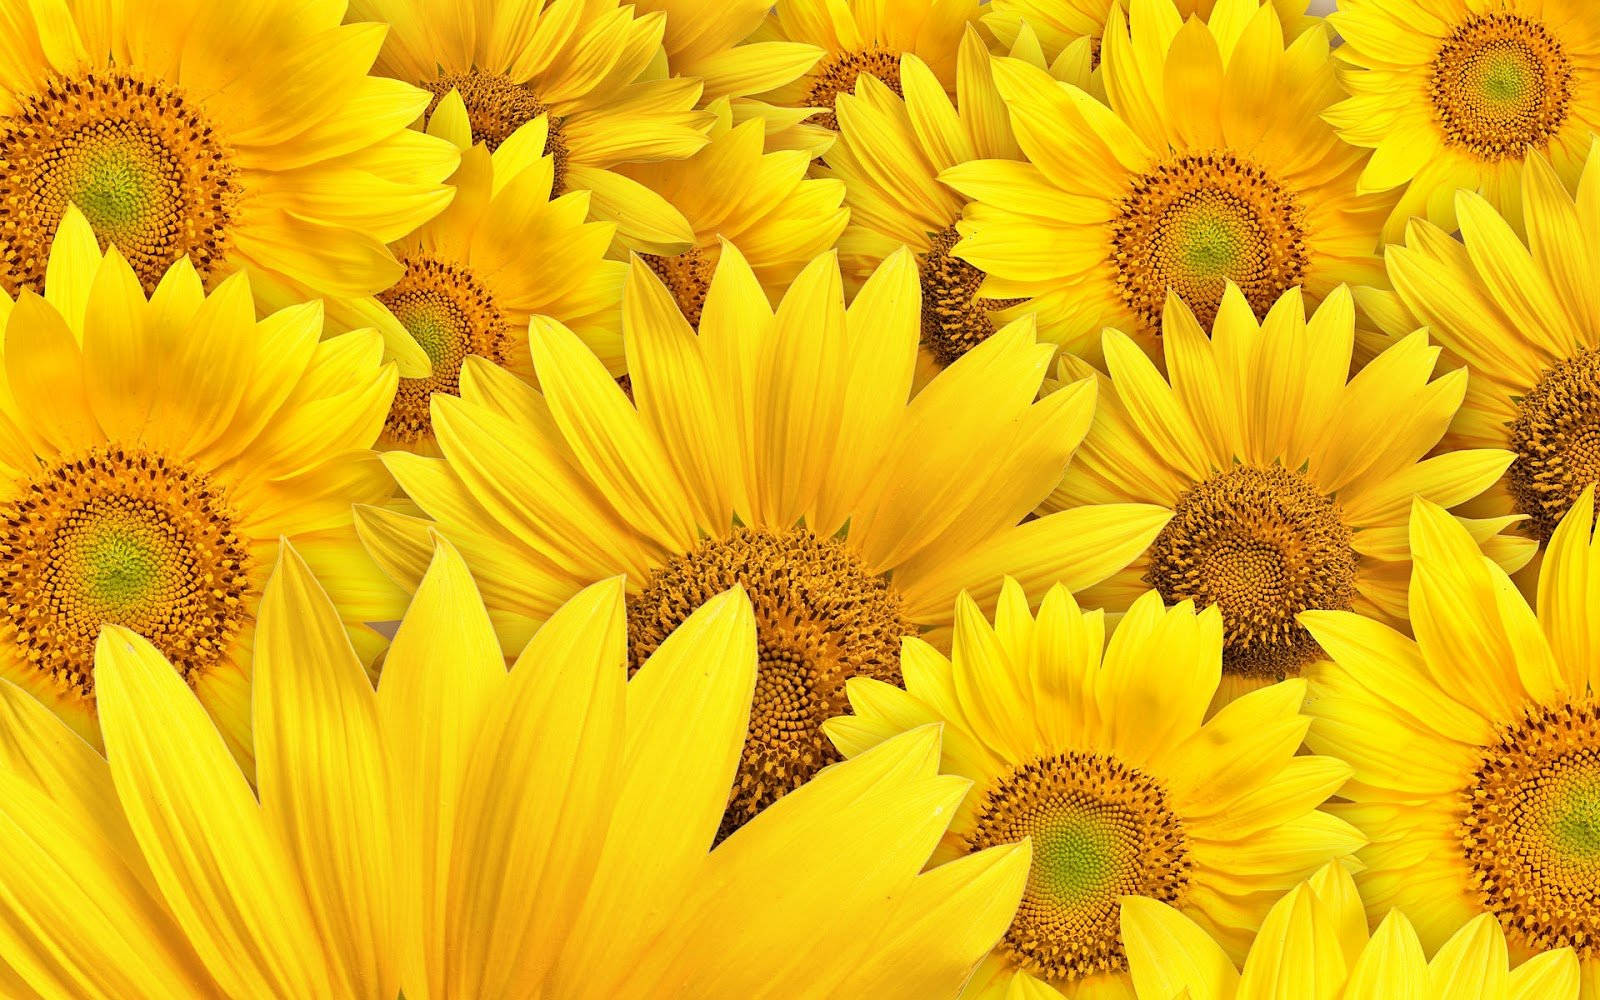 A Sunflower in Bloom Against the Vivid Blue Sky Wallpaper